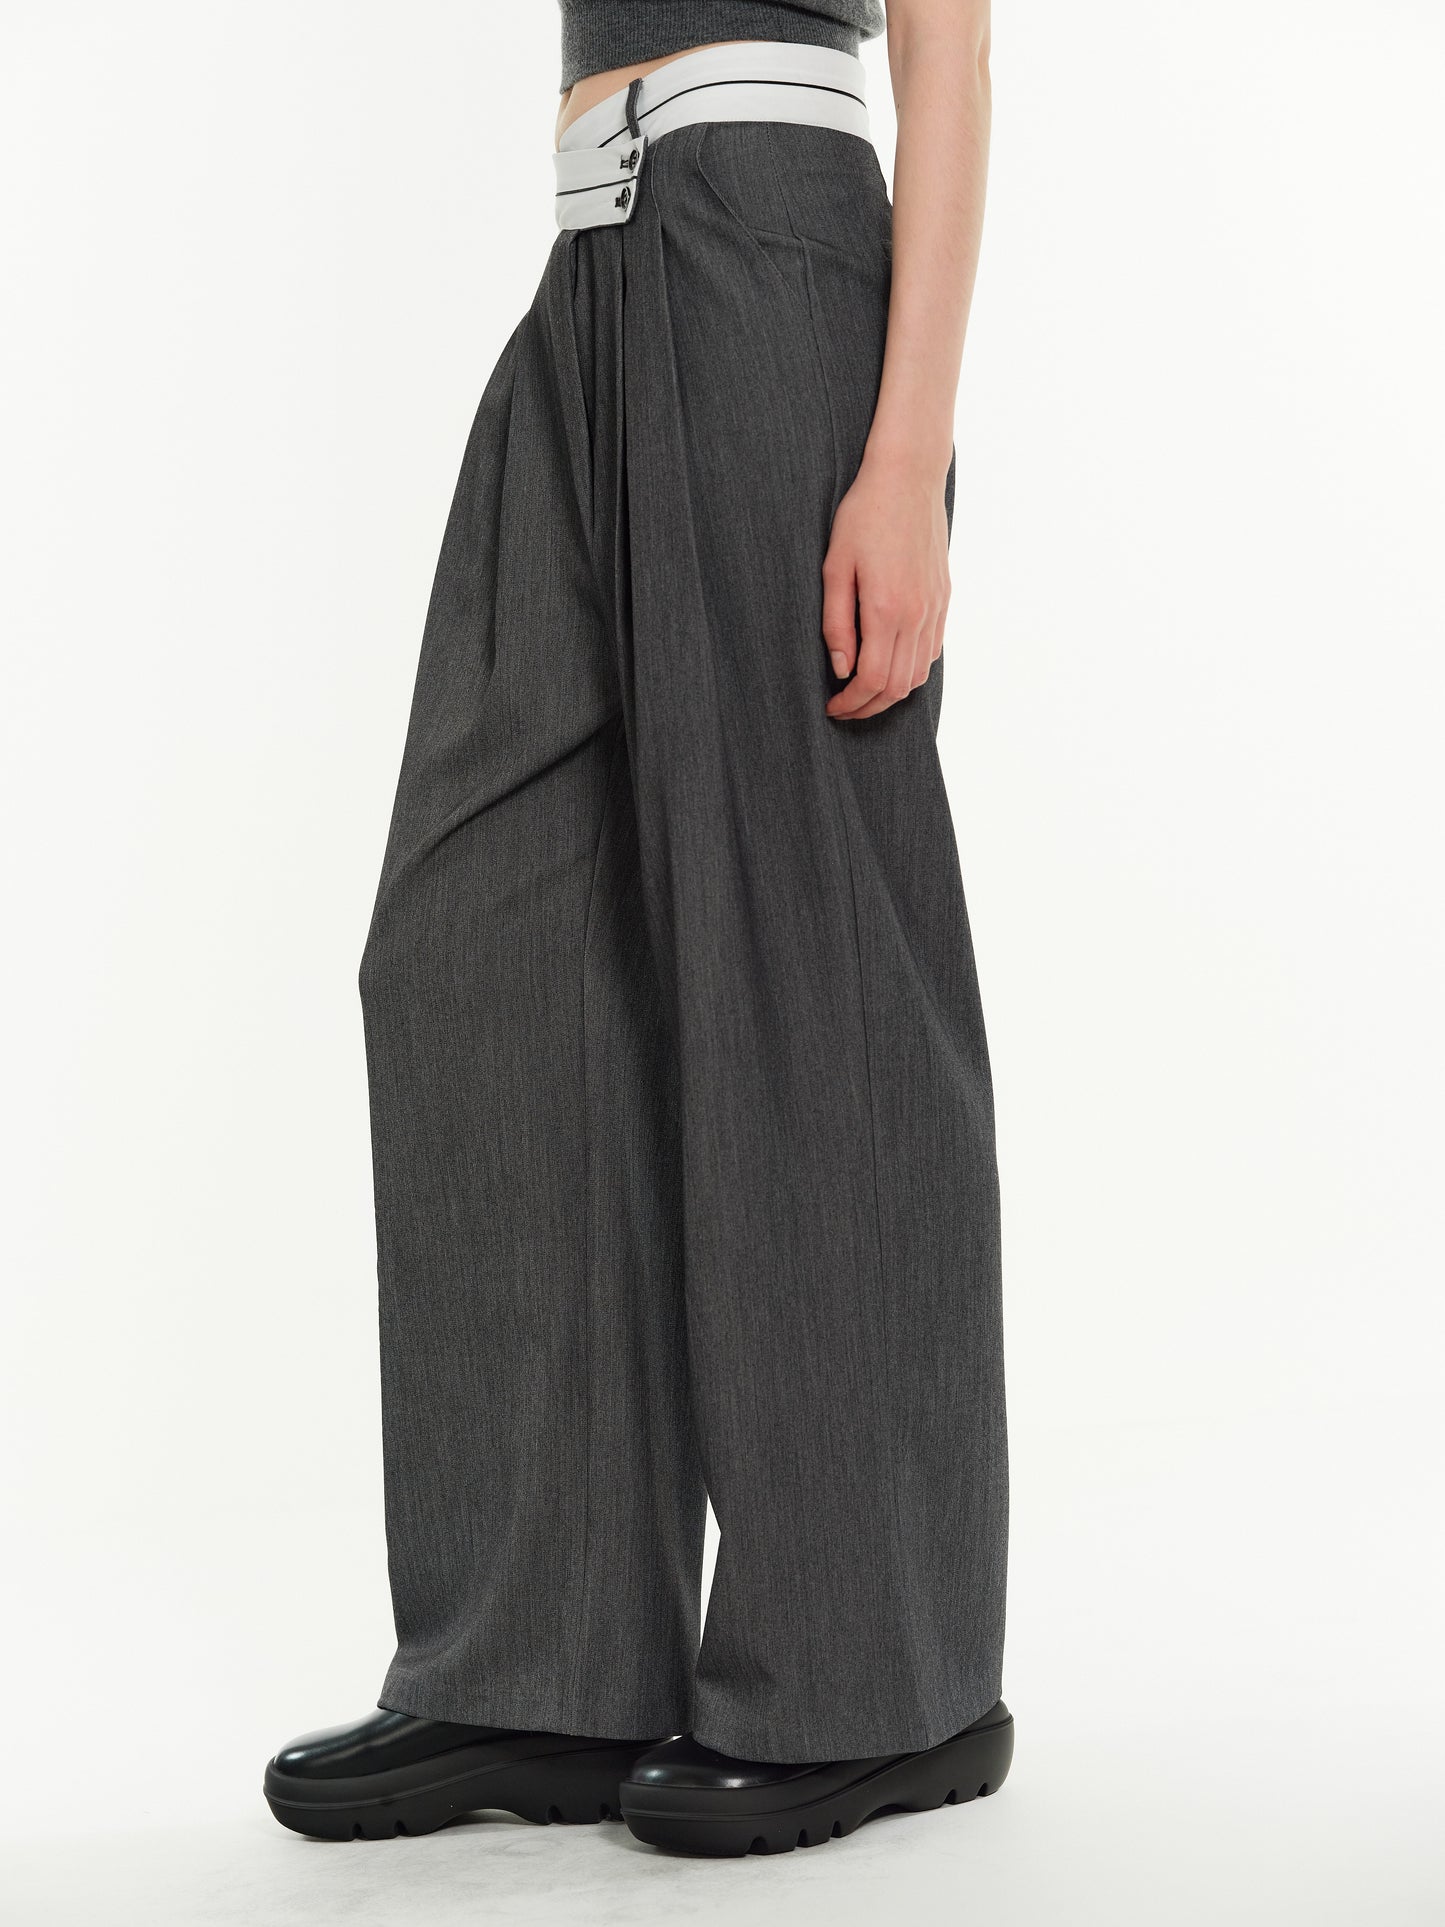 Criss Cross Reverse Trouser, Charcoal – SourceUnknown